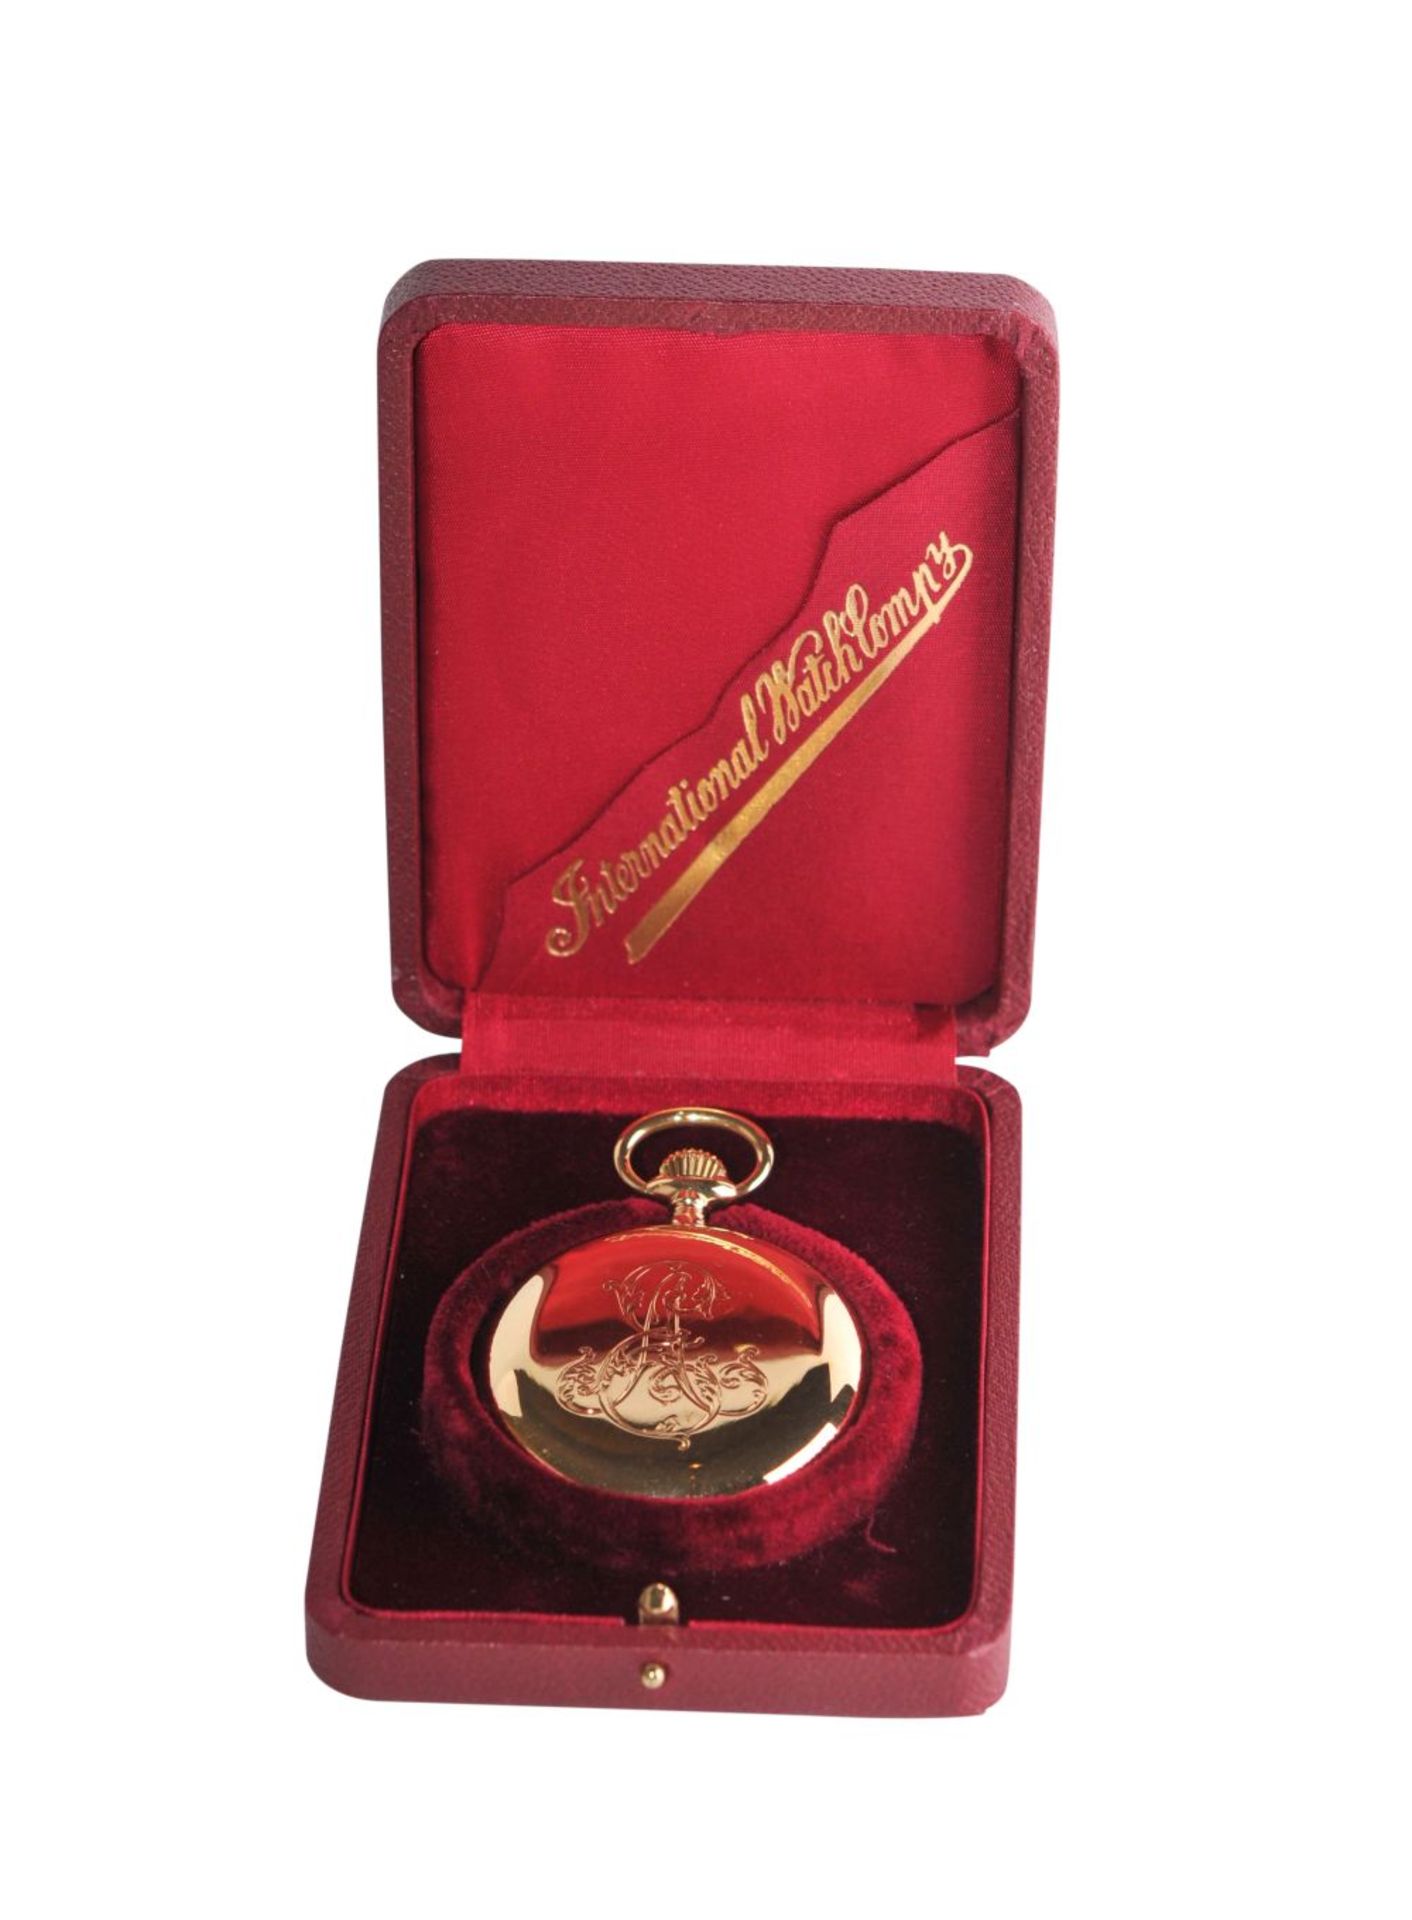 International WatchHeavy massive pocket watch with double Case engraved with AE gold-plated dial,